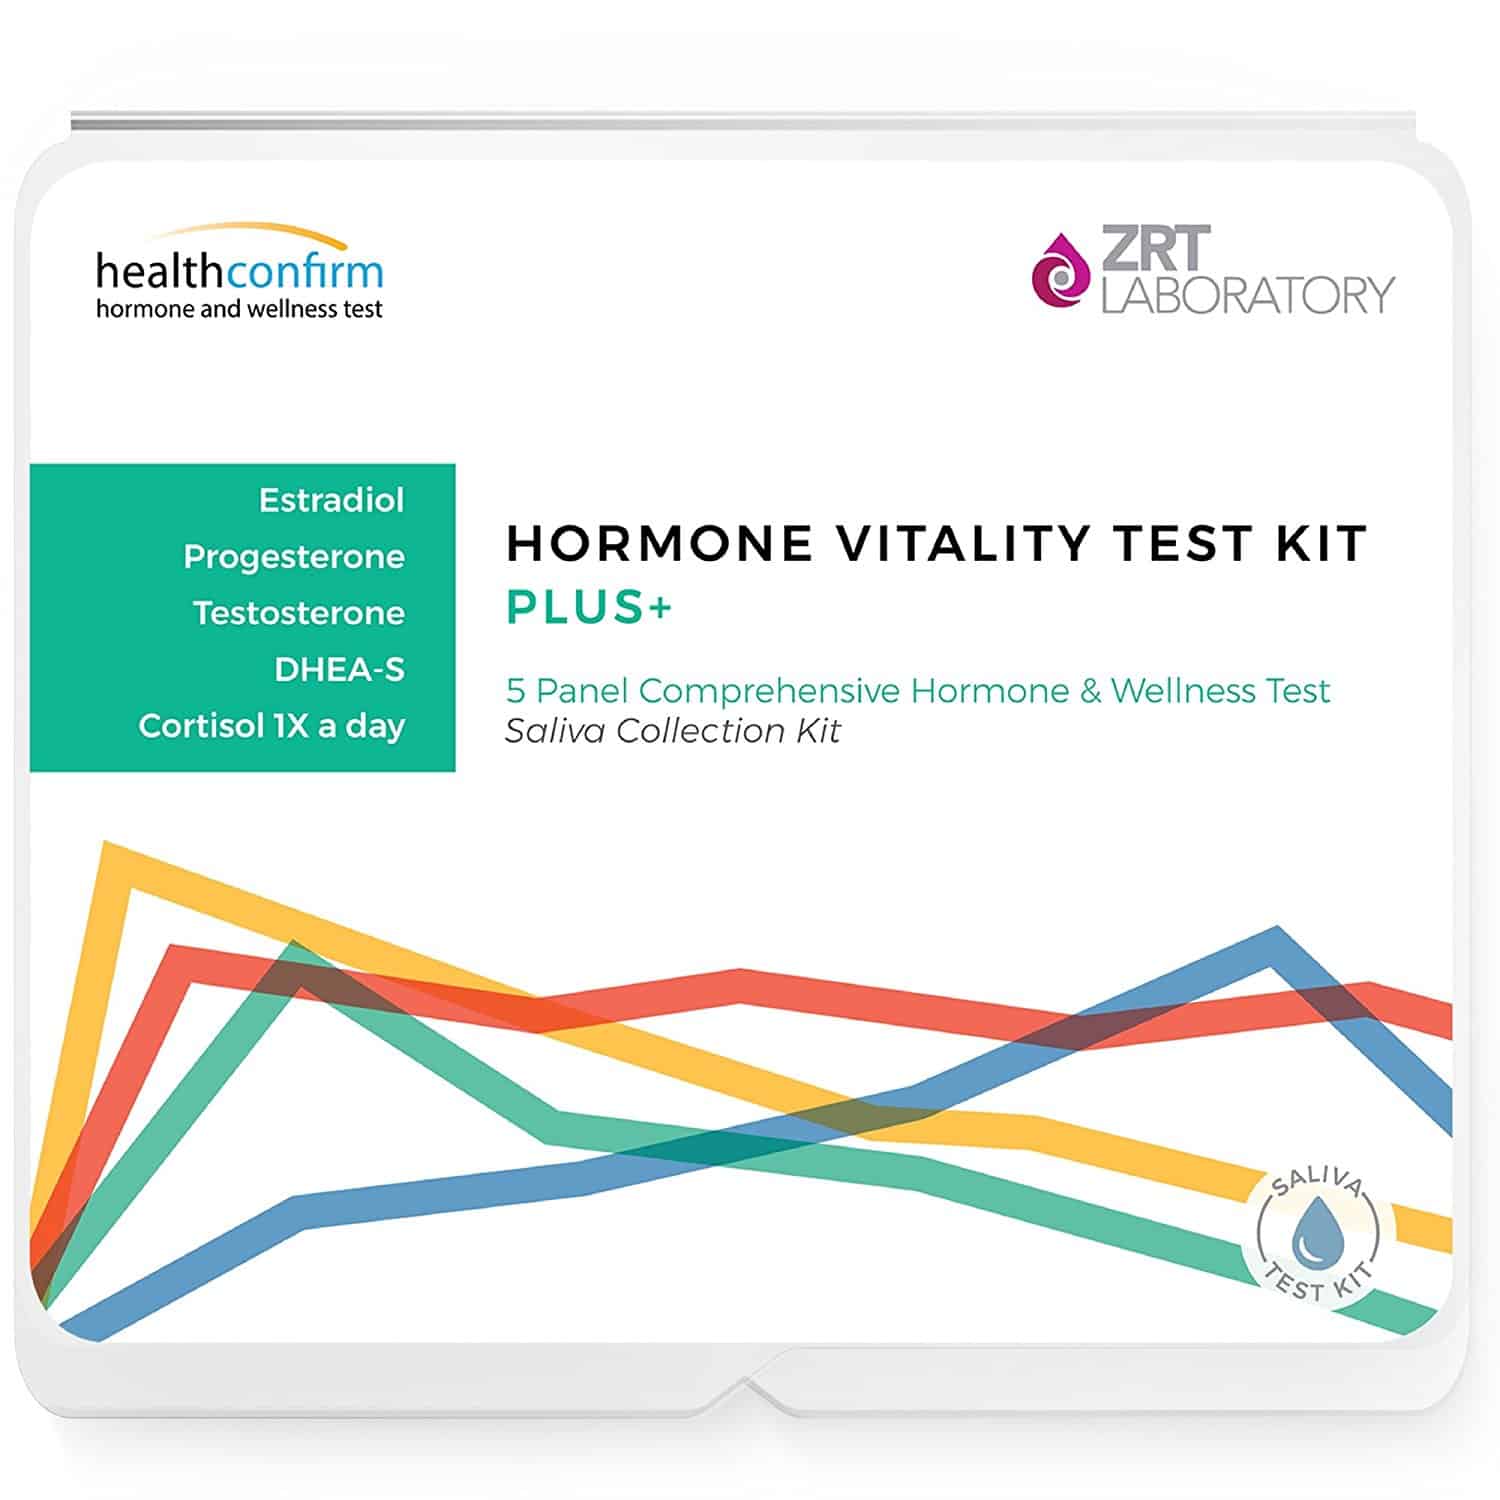 Hormone Testing Kit At Home: How To Keep Hormones In Balance